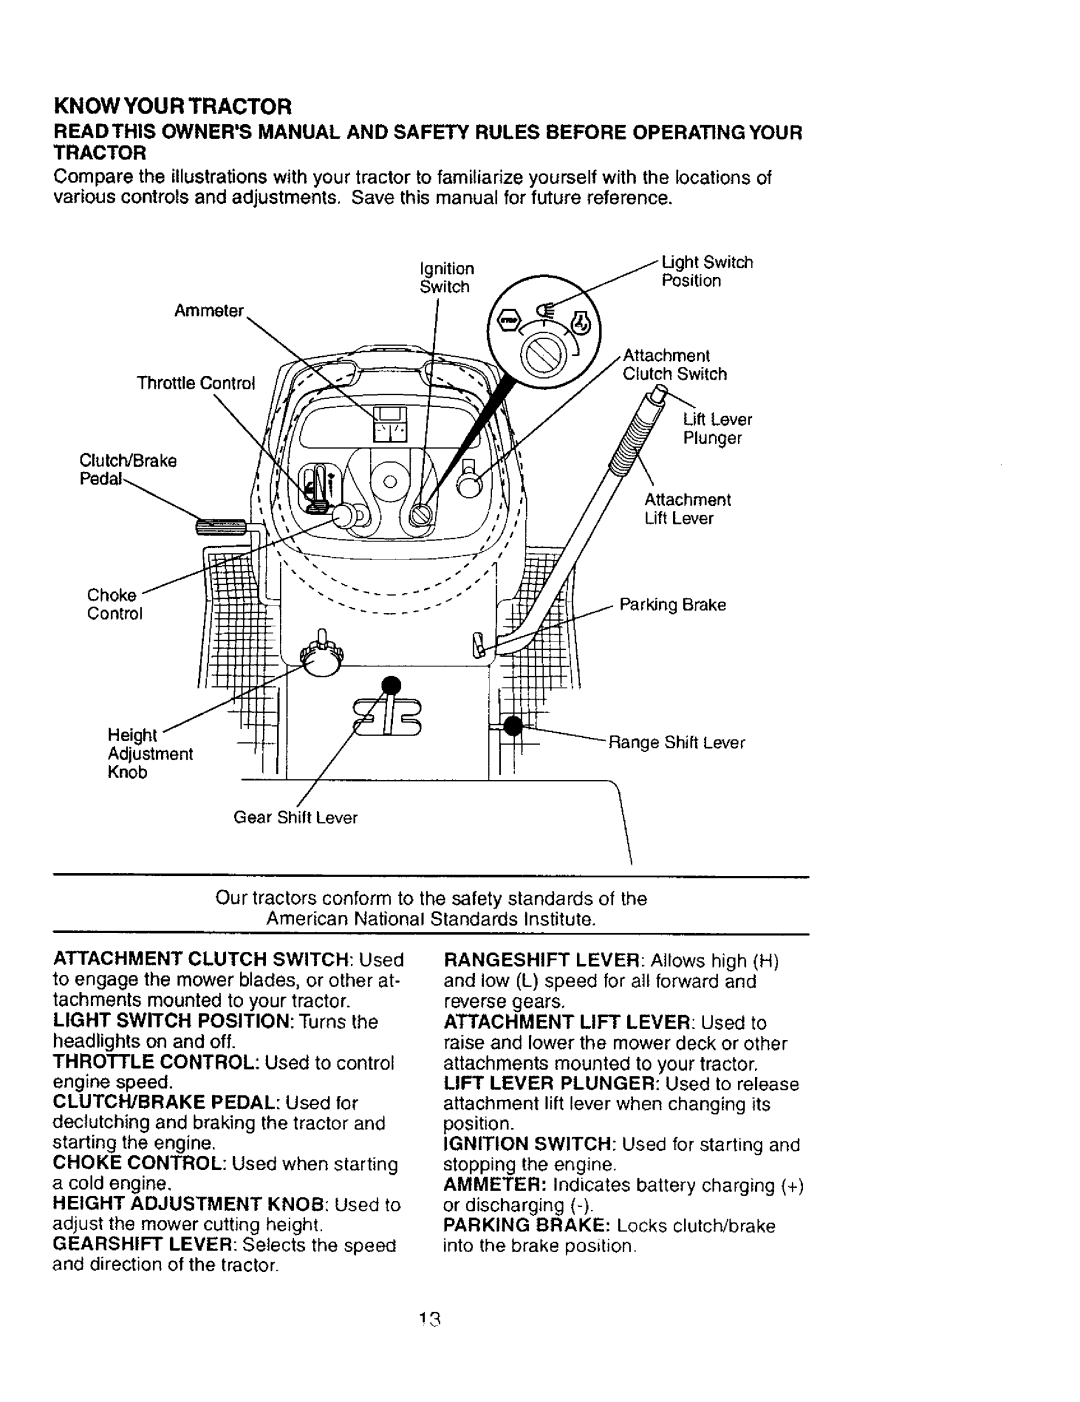 Craftsman 917.27603 manual Know Your Tractor, Lift Lever, Height 